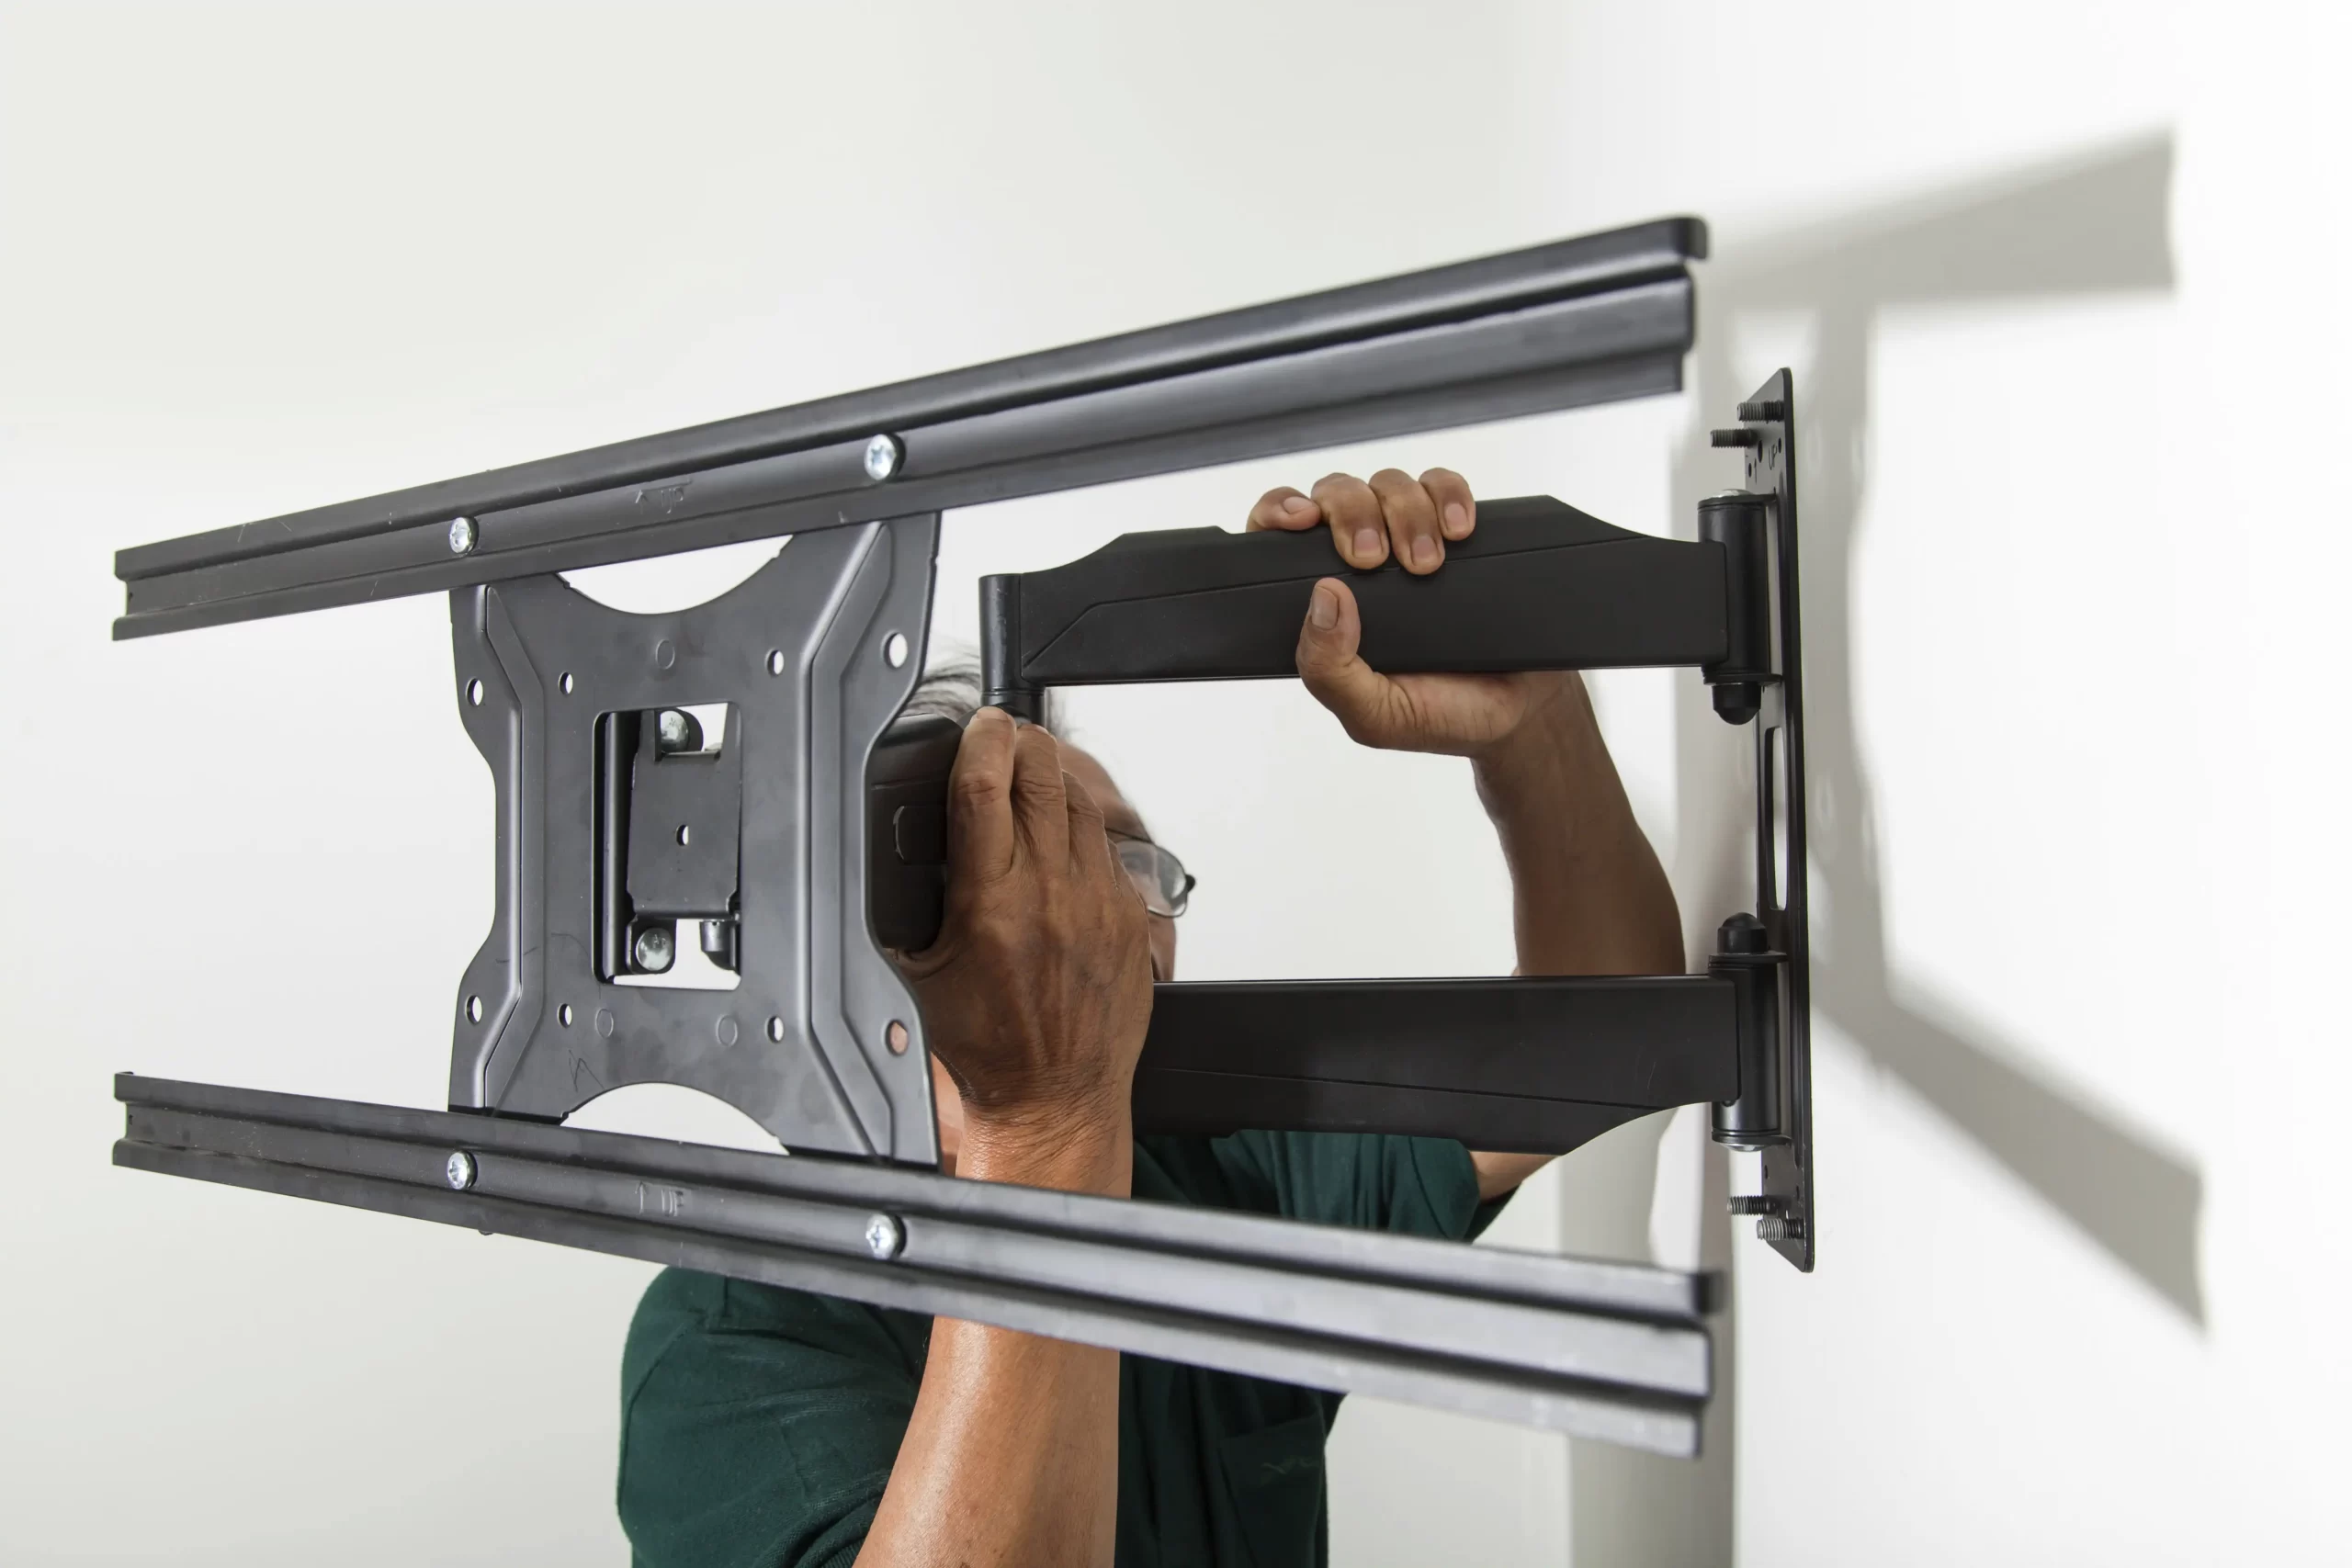 Full-motion TV Mounts – How To Make The Right Choice?